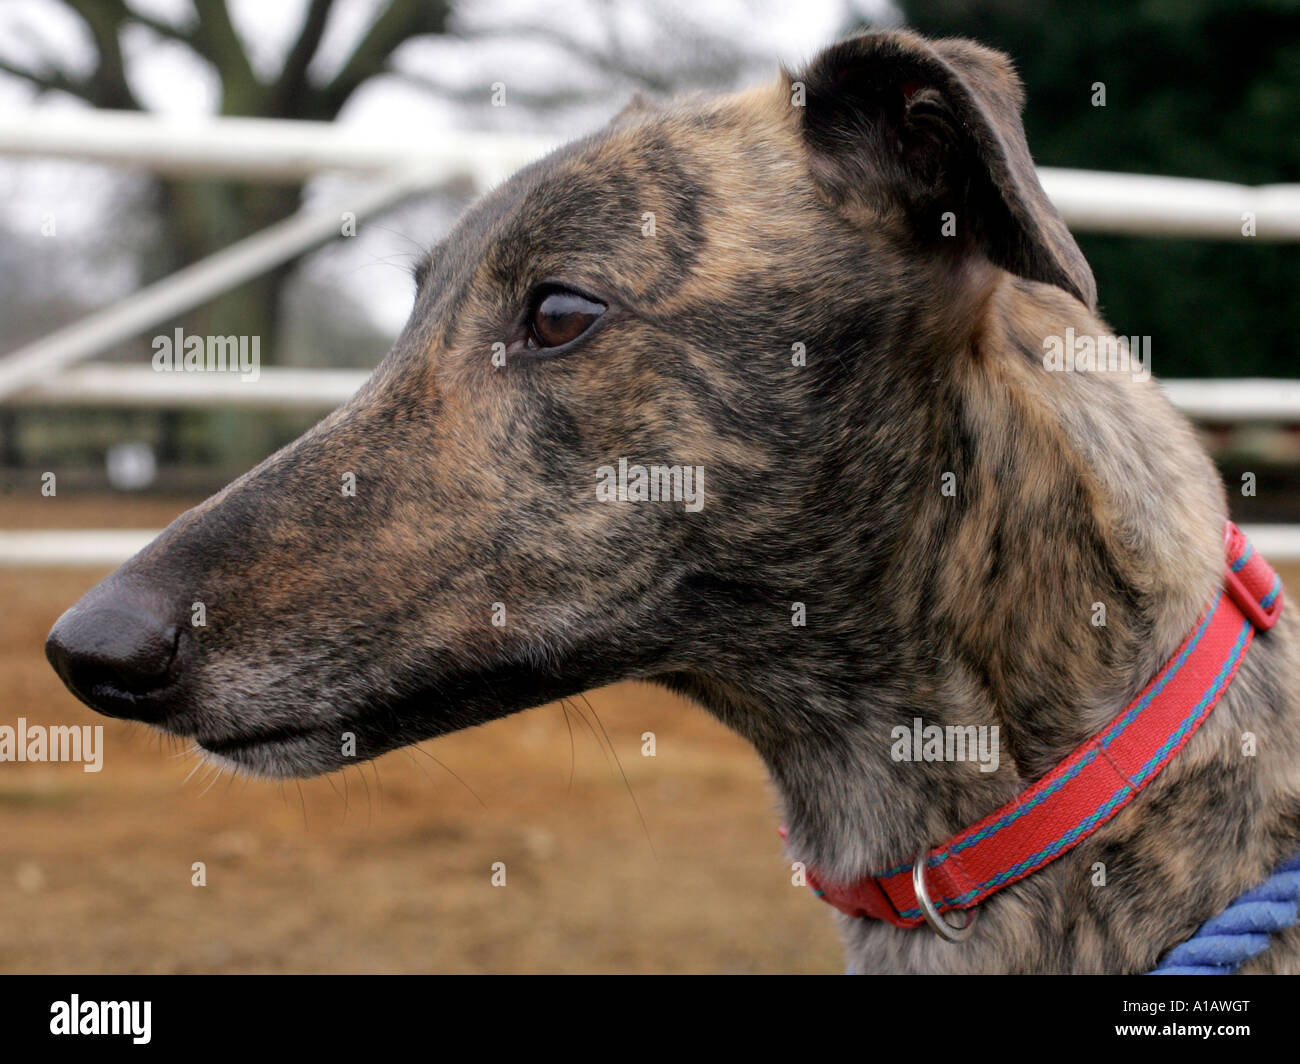 The profile of a greyhound taken outside near a racing track. Stock Photo